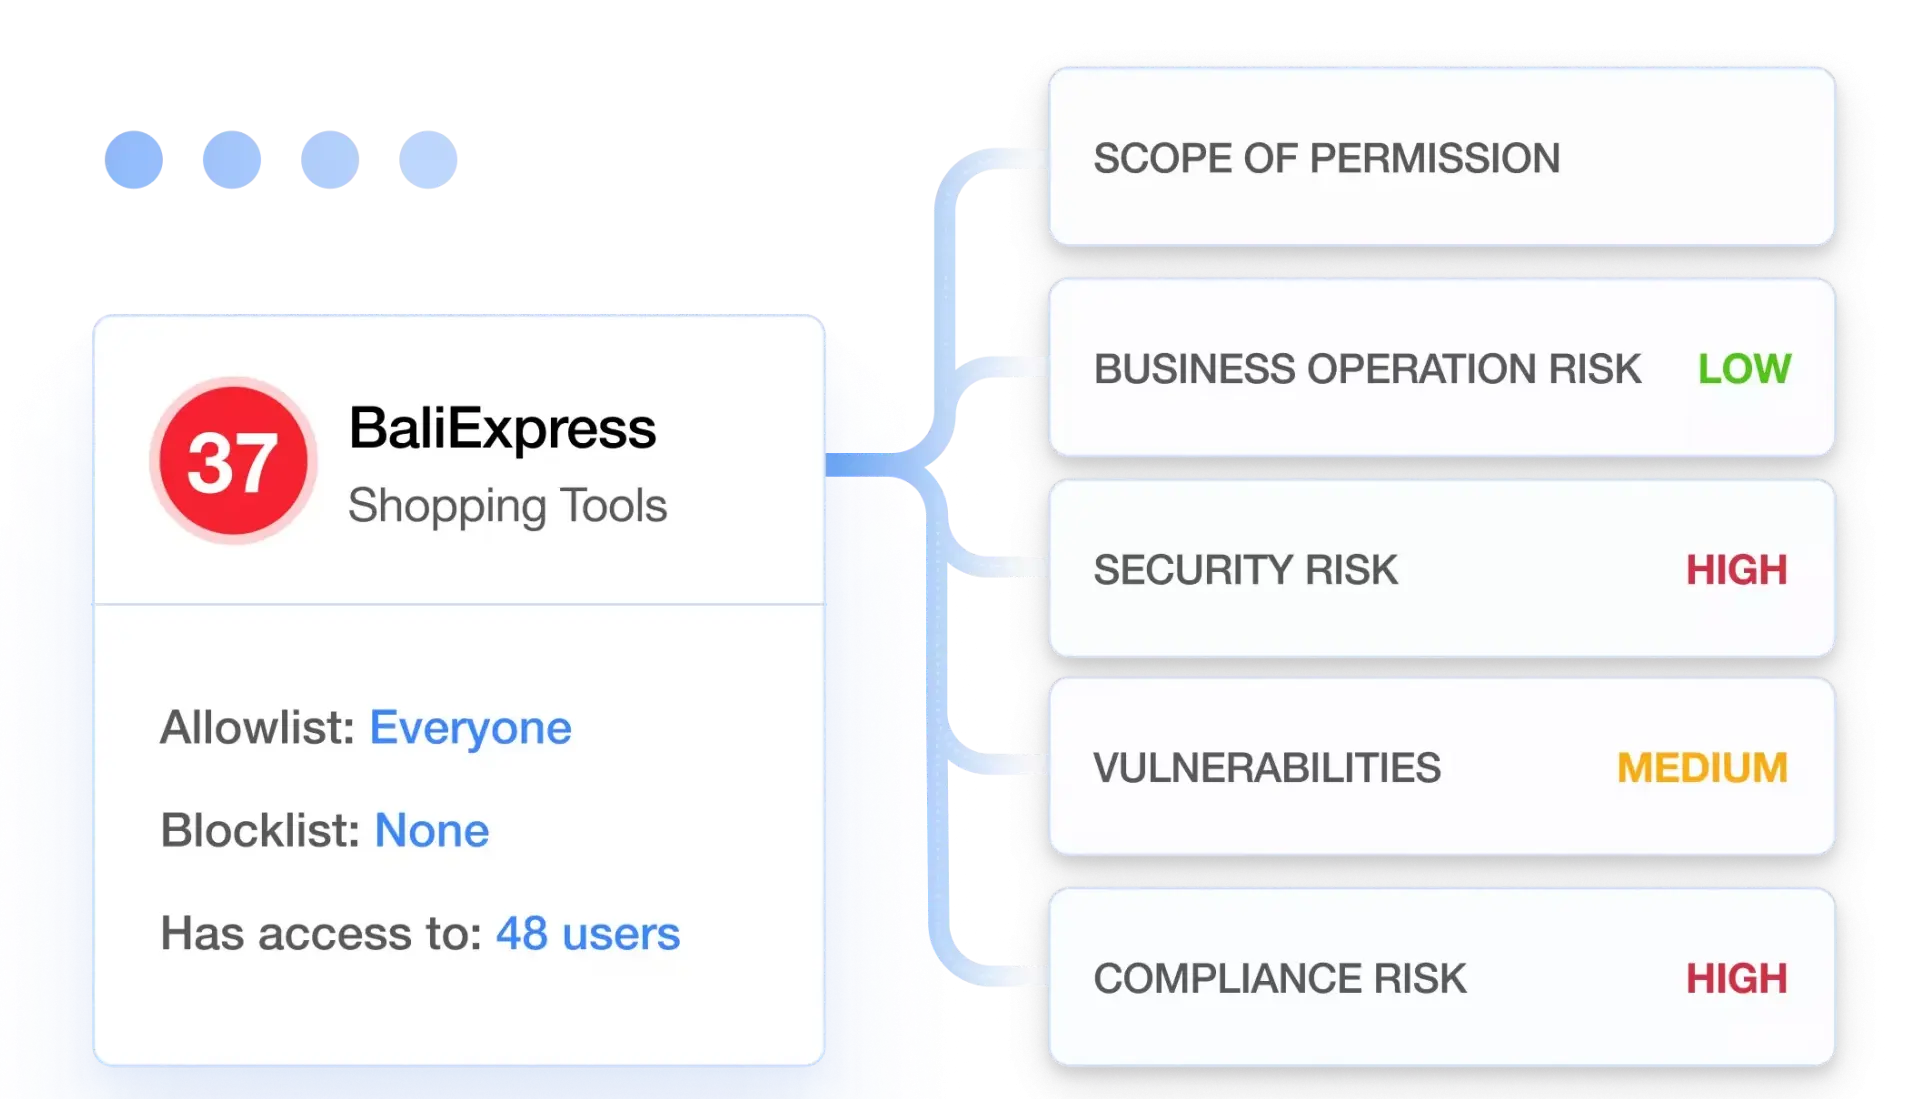 SpinSPM continuously assesses applications and extensions, and provides a risk score